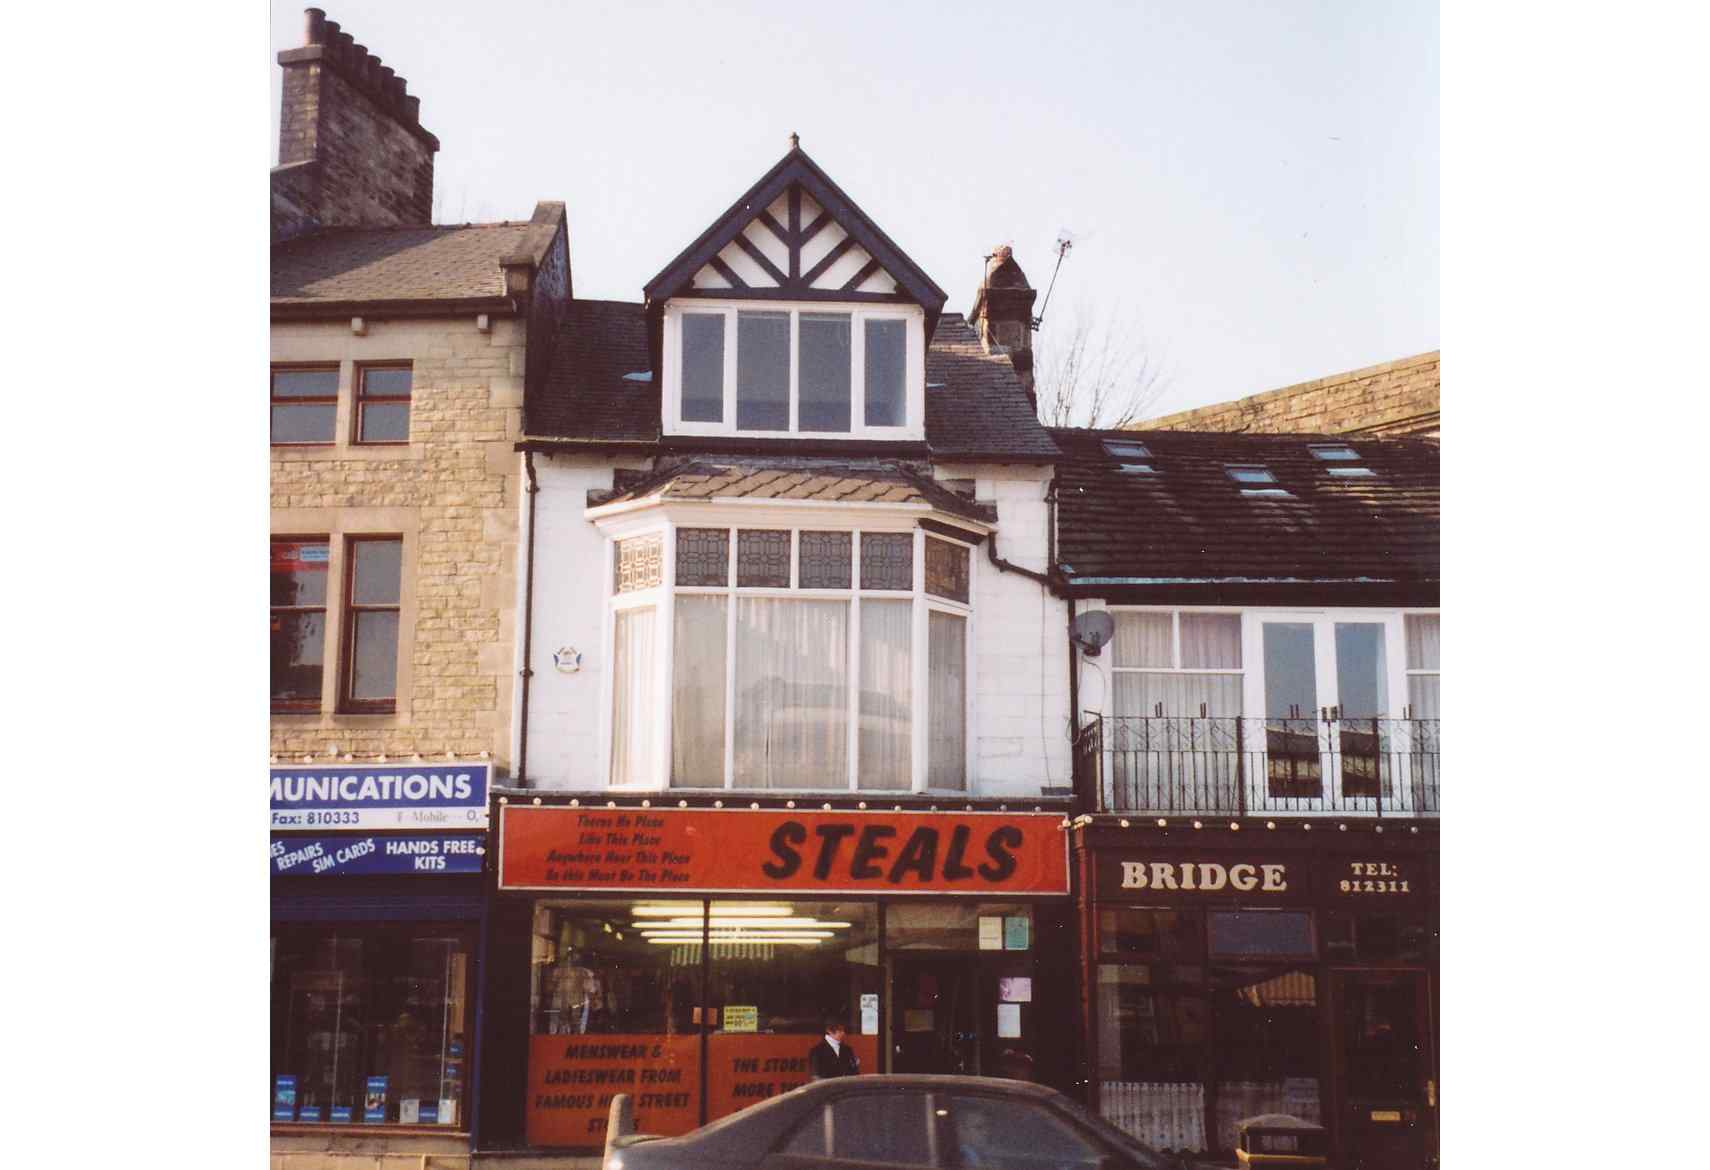 37 Burnley Road, Todmorden; as 'Steals' (now Costermongers)